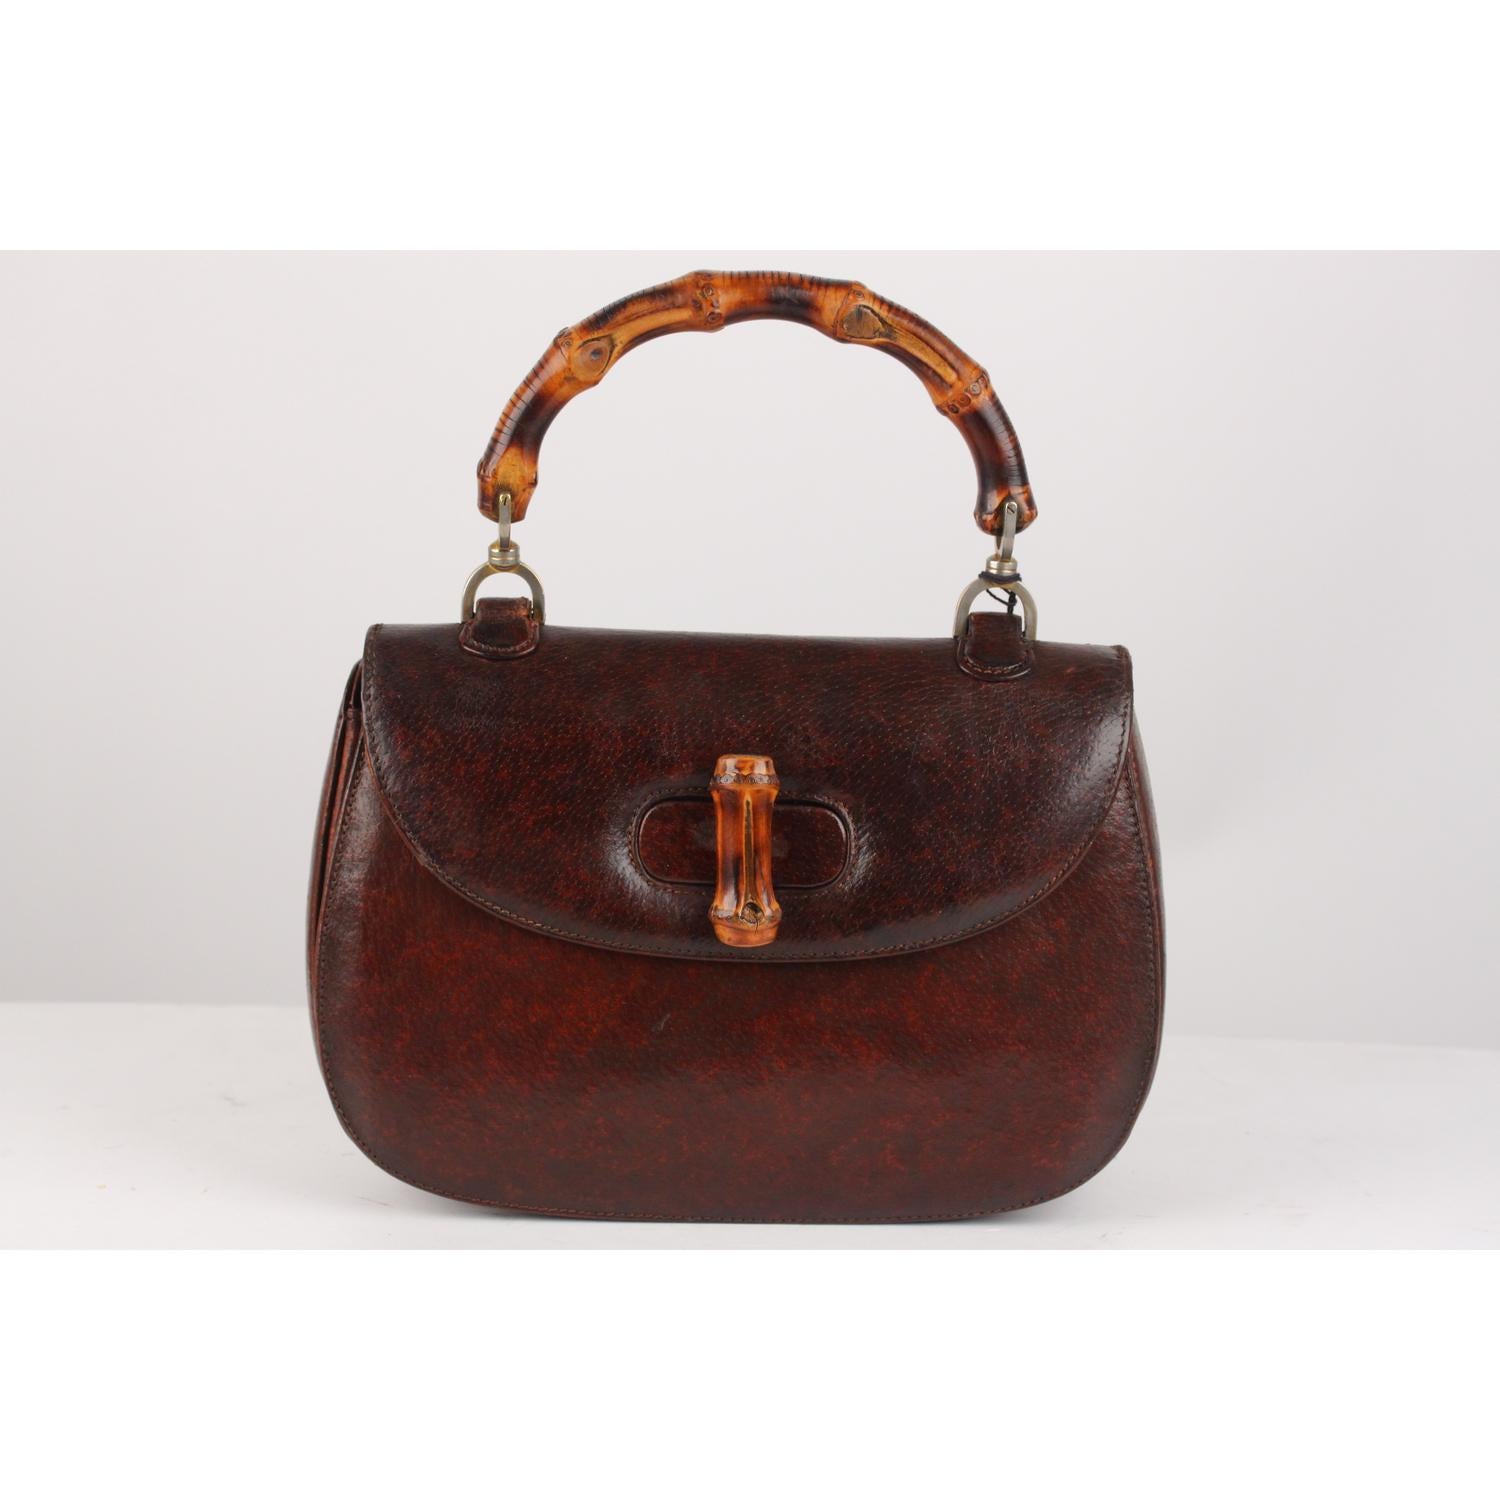 Rare GUCCI vintage Leather bamboo bag in brown leather. The bag features a looping bamboo top handle, a frontal flap, brass hardware and a bamboo turn lock. This is an iconic model created by GUCCI artisanals in 1947. The usage of bamboo might have